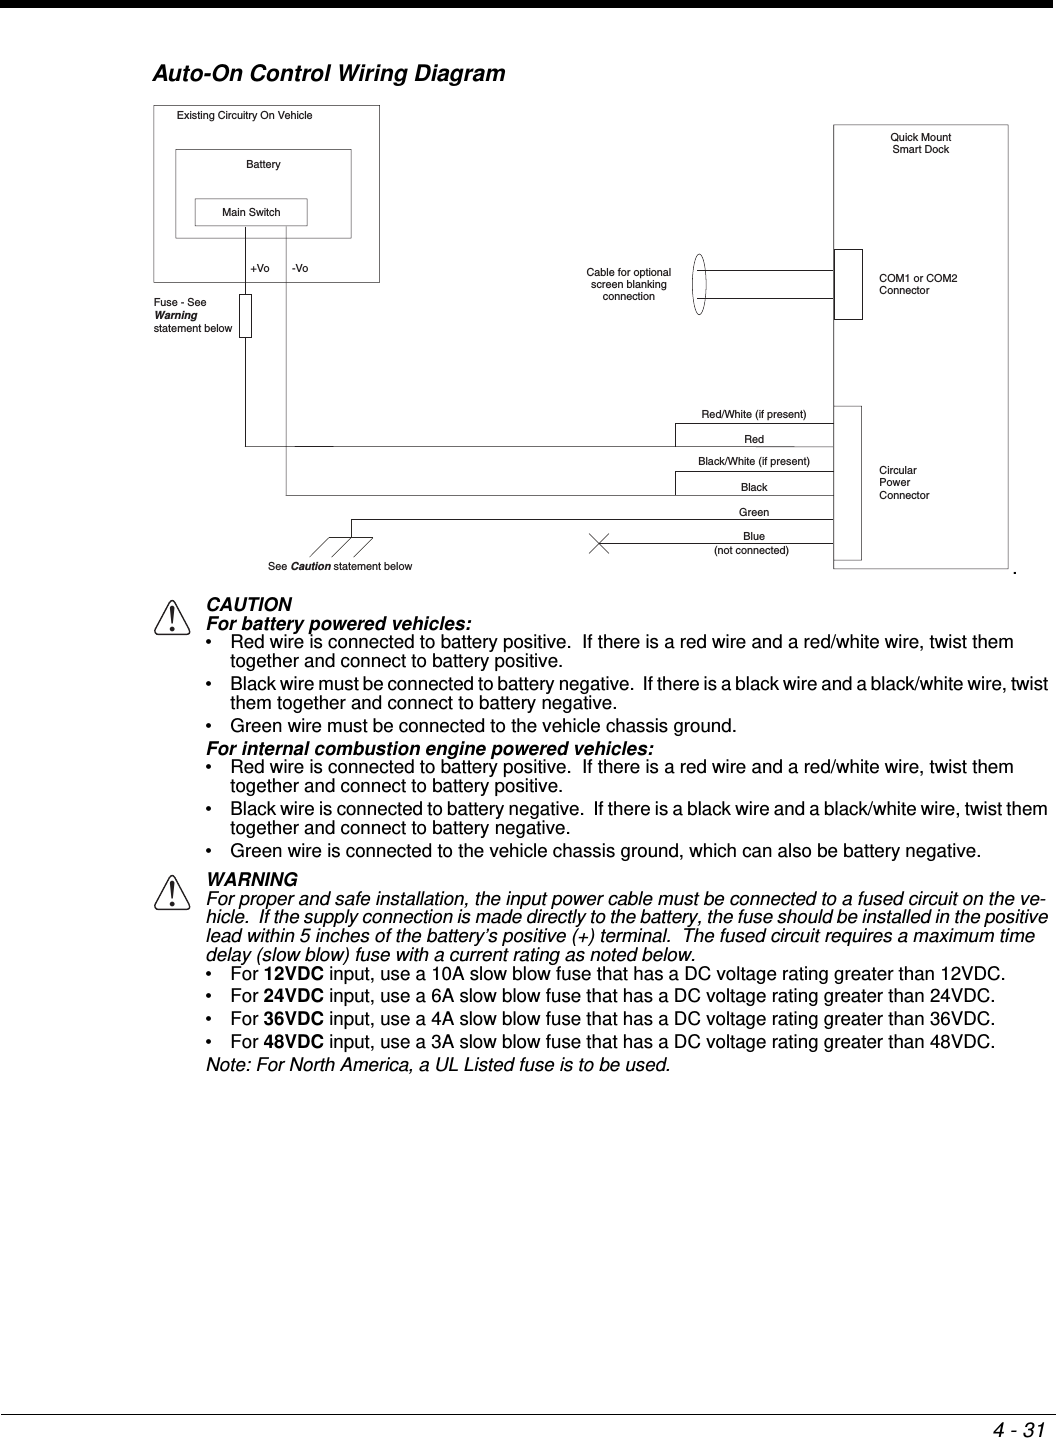 4 - 31Auto-On Control Wiring Diagram.CAUTIONFor battery powered vehicles:• Red wire is connected to battery positive.  If there is a red wire and a red/white wire, twist them together and connect to battery positive.• Black wire must be connected to battery negative.  If there is a black wire and a black/white wire, twist them together and connect to battery negative.• Green wire must be connected to the vehicle chassis ground.For internal combustion engine powered vehicles:• Red wire is connected to battery positive.  If there is a red wire and a red/white wire, twist them together and connect to battery positive.• Black wire is connected to battery negative.  If there is a black wire and a black/white wire, twist them together and connect to battery negative.• Green wire is connected to the vehicle chassis ground, which can also be battery negative.WARNINGFor proper and safe installation, the input power cable must be connected to a fused circuit on the ve-hicle.  If the supply connection is made directly to the battery, the fuse should be installed in the positive lead within 5 inches of the battery’s positive (+) terminal.  The fused circuit requires a maximum time delay (slow blow) fuse with a current rating as noted below.•For 12VDC input, use a 10A slow blow fuse that has a DC voltage rating greater than 12VDC.•For 24VDC input, use a 6A slow blow fuse that has a DC voltage rating greater than 24VDC.•For 36VDC input, use a 4A slow blow fuse that has a DC voltage rating greater than 36VDC.•For 48VDC input, use a 3A slow blow fuse that has a DC voltage rating greater than 48VDC.Note: For North America, a UL Listed fuse is to be used.Quick MountSmart DockCircularPowerConnectorCOM1 or COM2ConnectorExisting Circuitry On VehicleBatteryMain Switch-Vo+Vo Cable for optionalscreen blankingconnectionSee Caution statement belowFuse - SeeWarning statement below (not connected)RedBlackGreenBlueRed/White (if present)Black/White (if present)!!